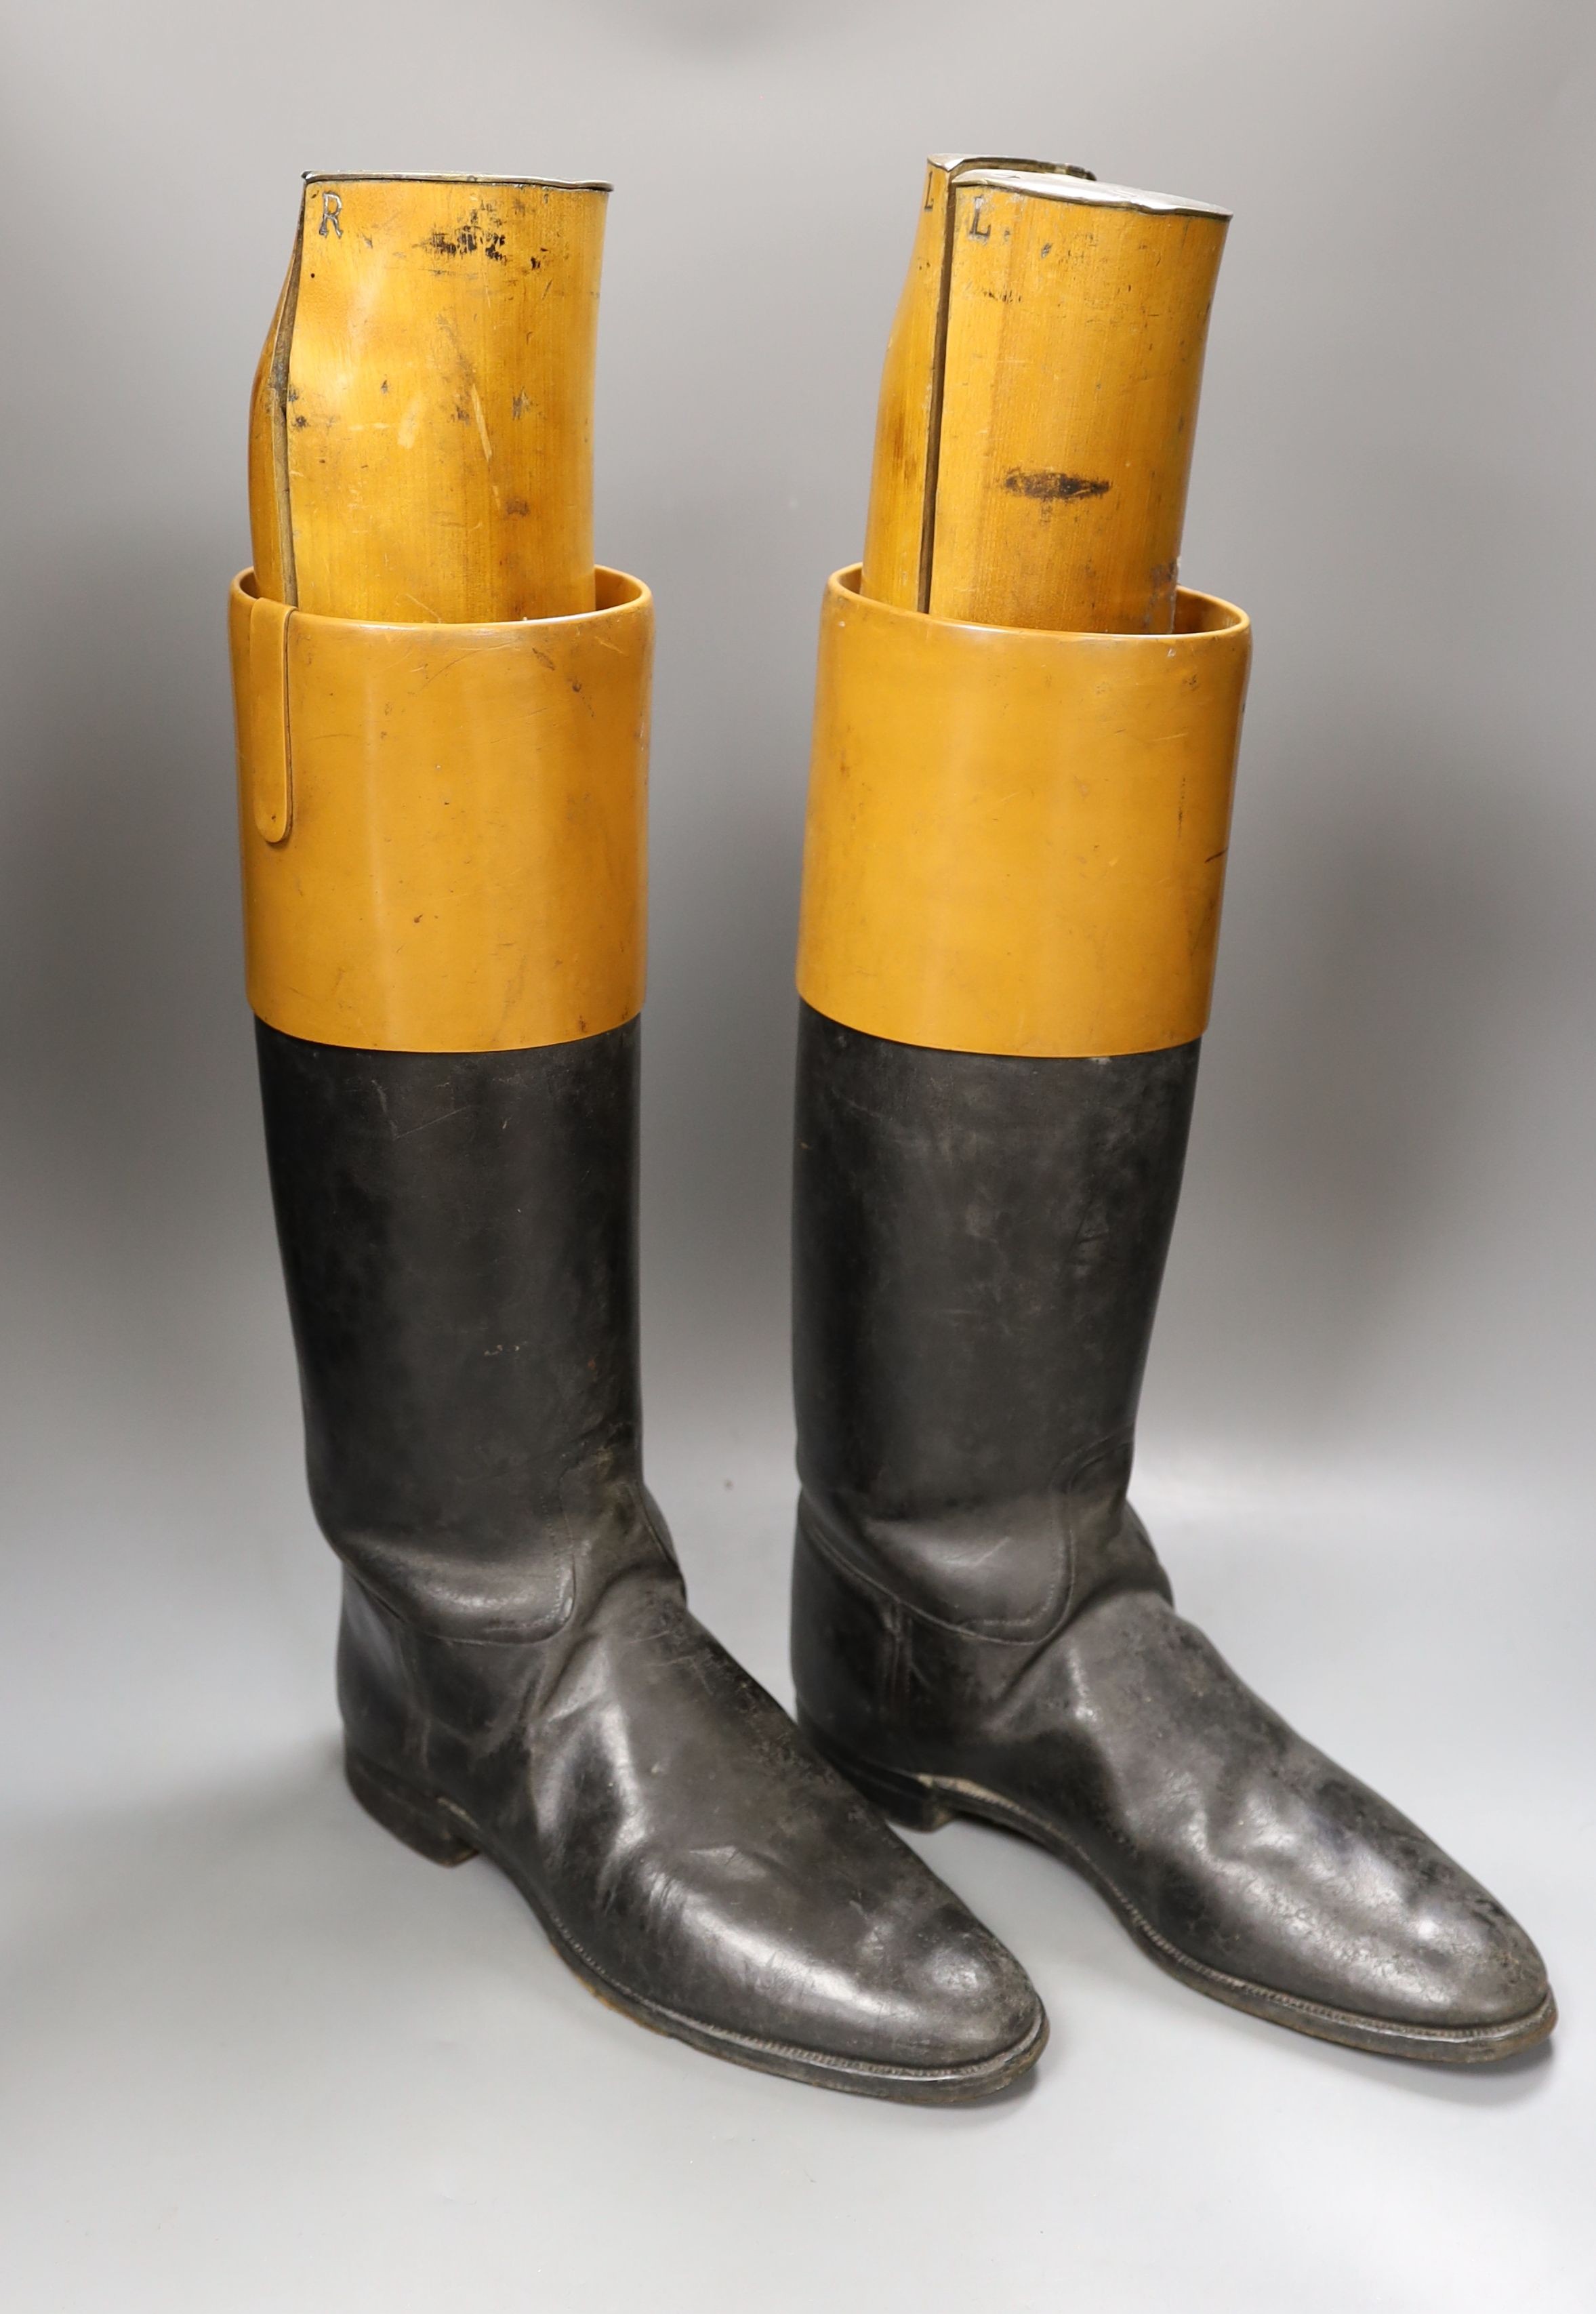 A pair of vintage leather riding boots with beech wood boot trees by Seadon Bros, St. James’s, mounted with engraved brass plates. height of trees 52 cms. *This lot is being sold in aid of the charity Prostate Cancer UK